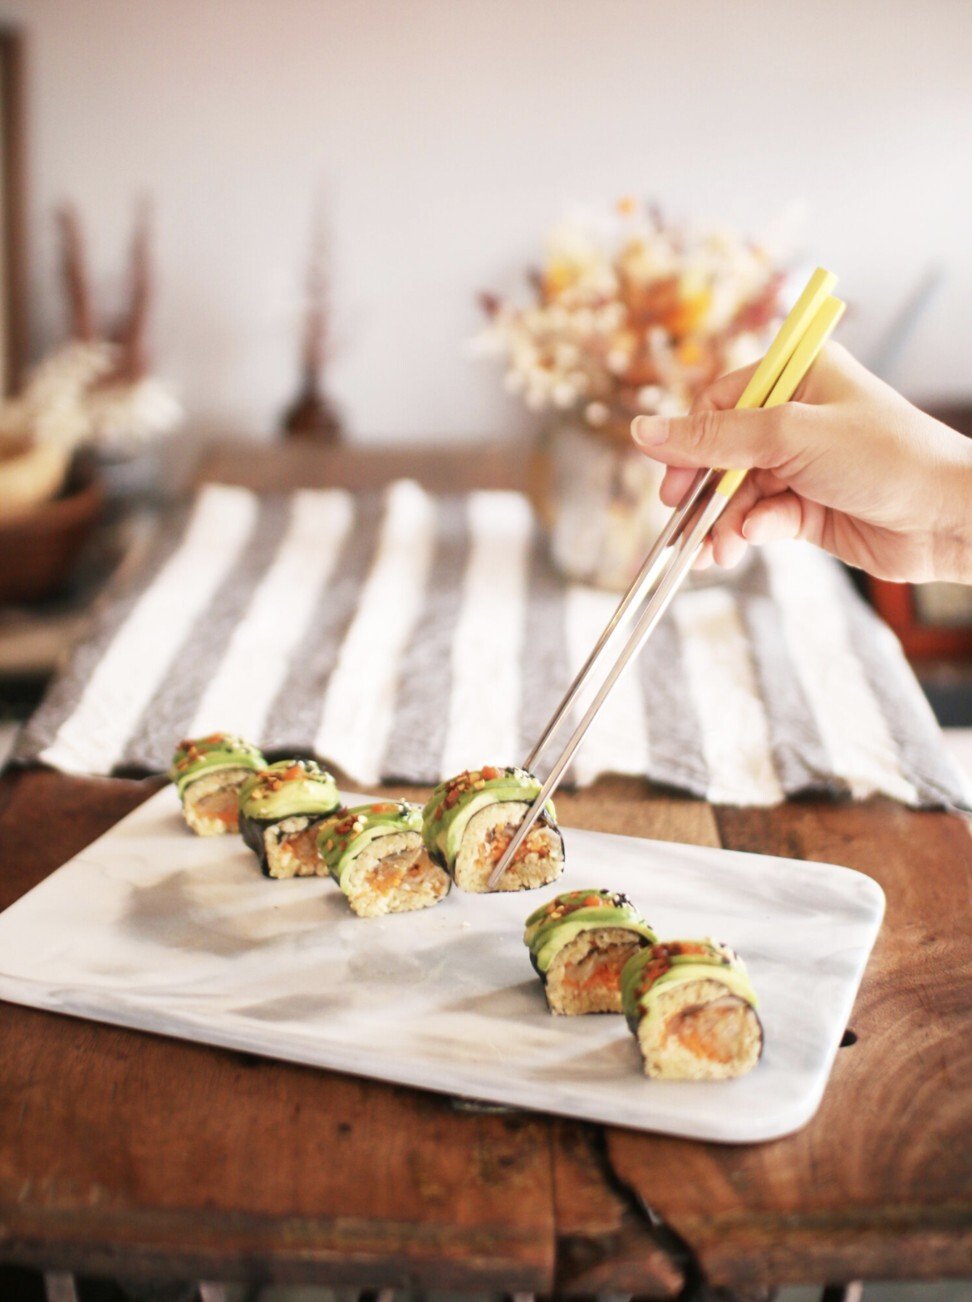 Kimchi avocado roll from Afterglow by Anglow in Singapore. Photo: courtesy of Afterglow by Anglow